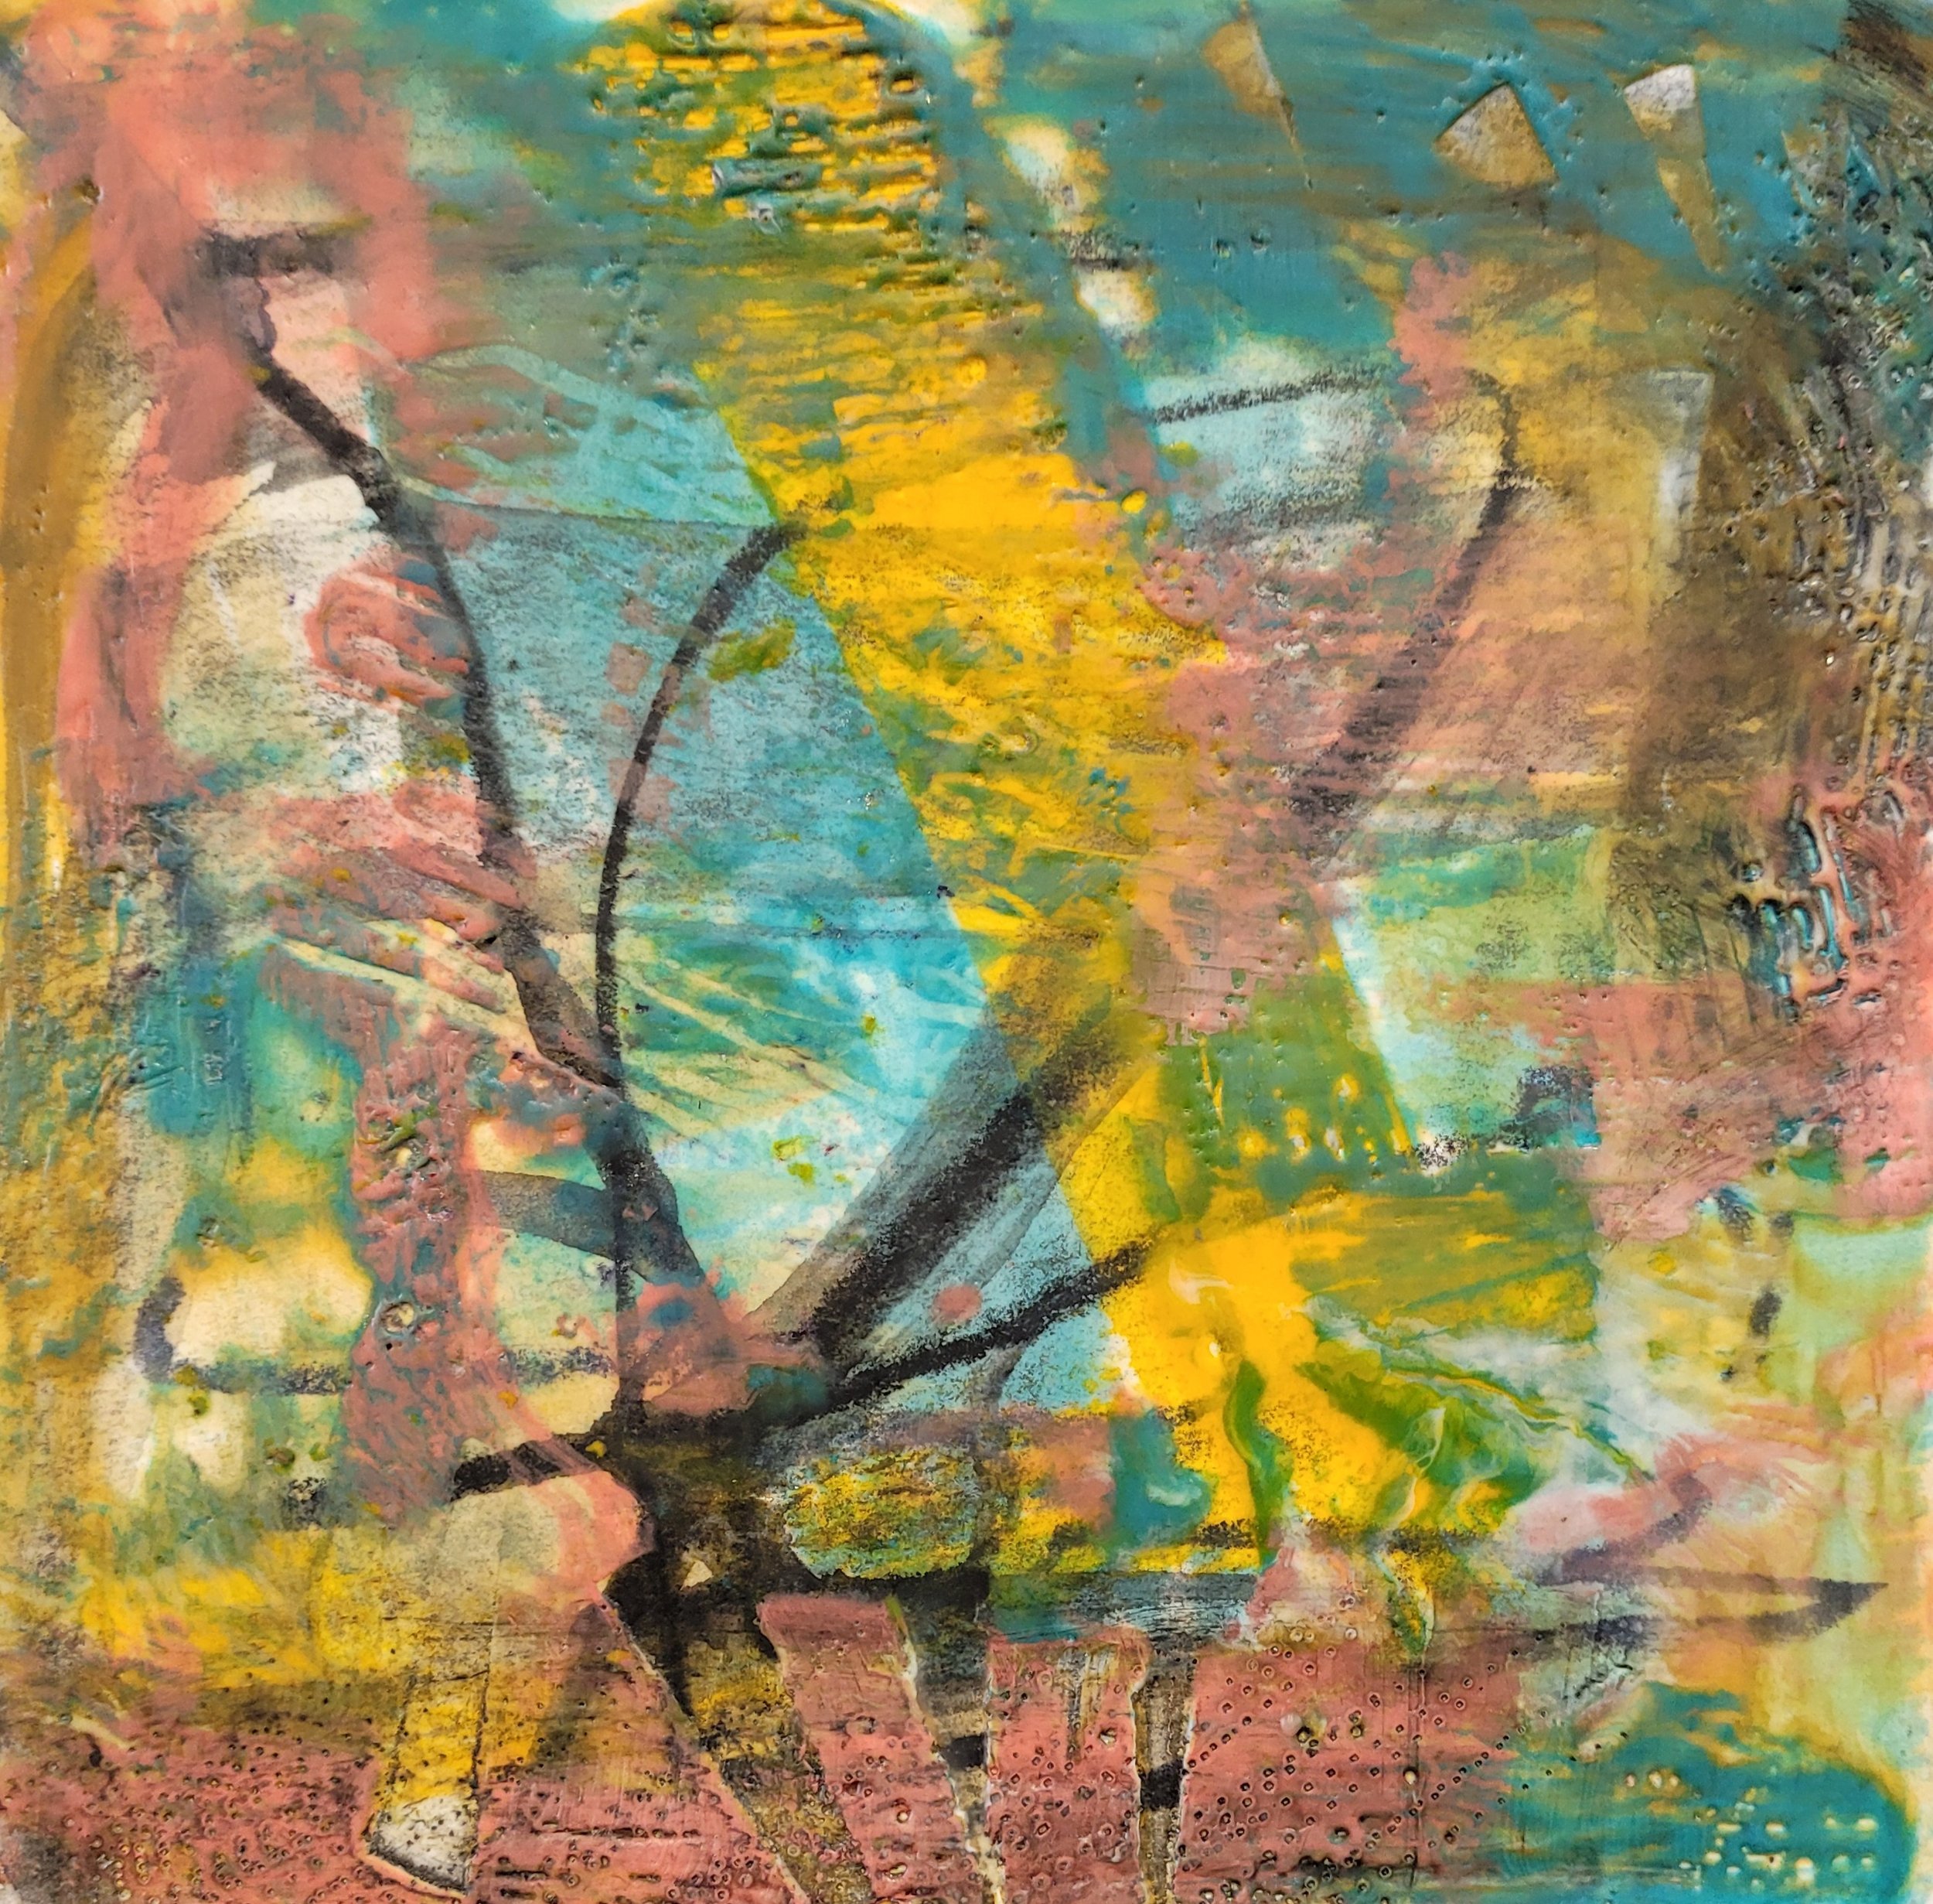   Early Autumn I , encaustic on paper, 6 x 6 in. 